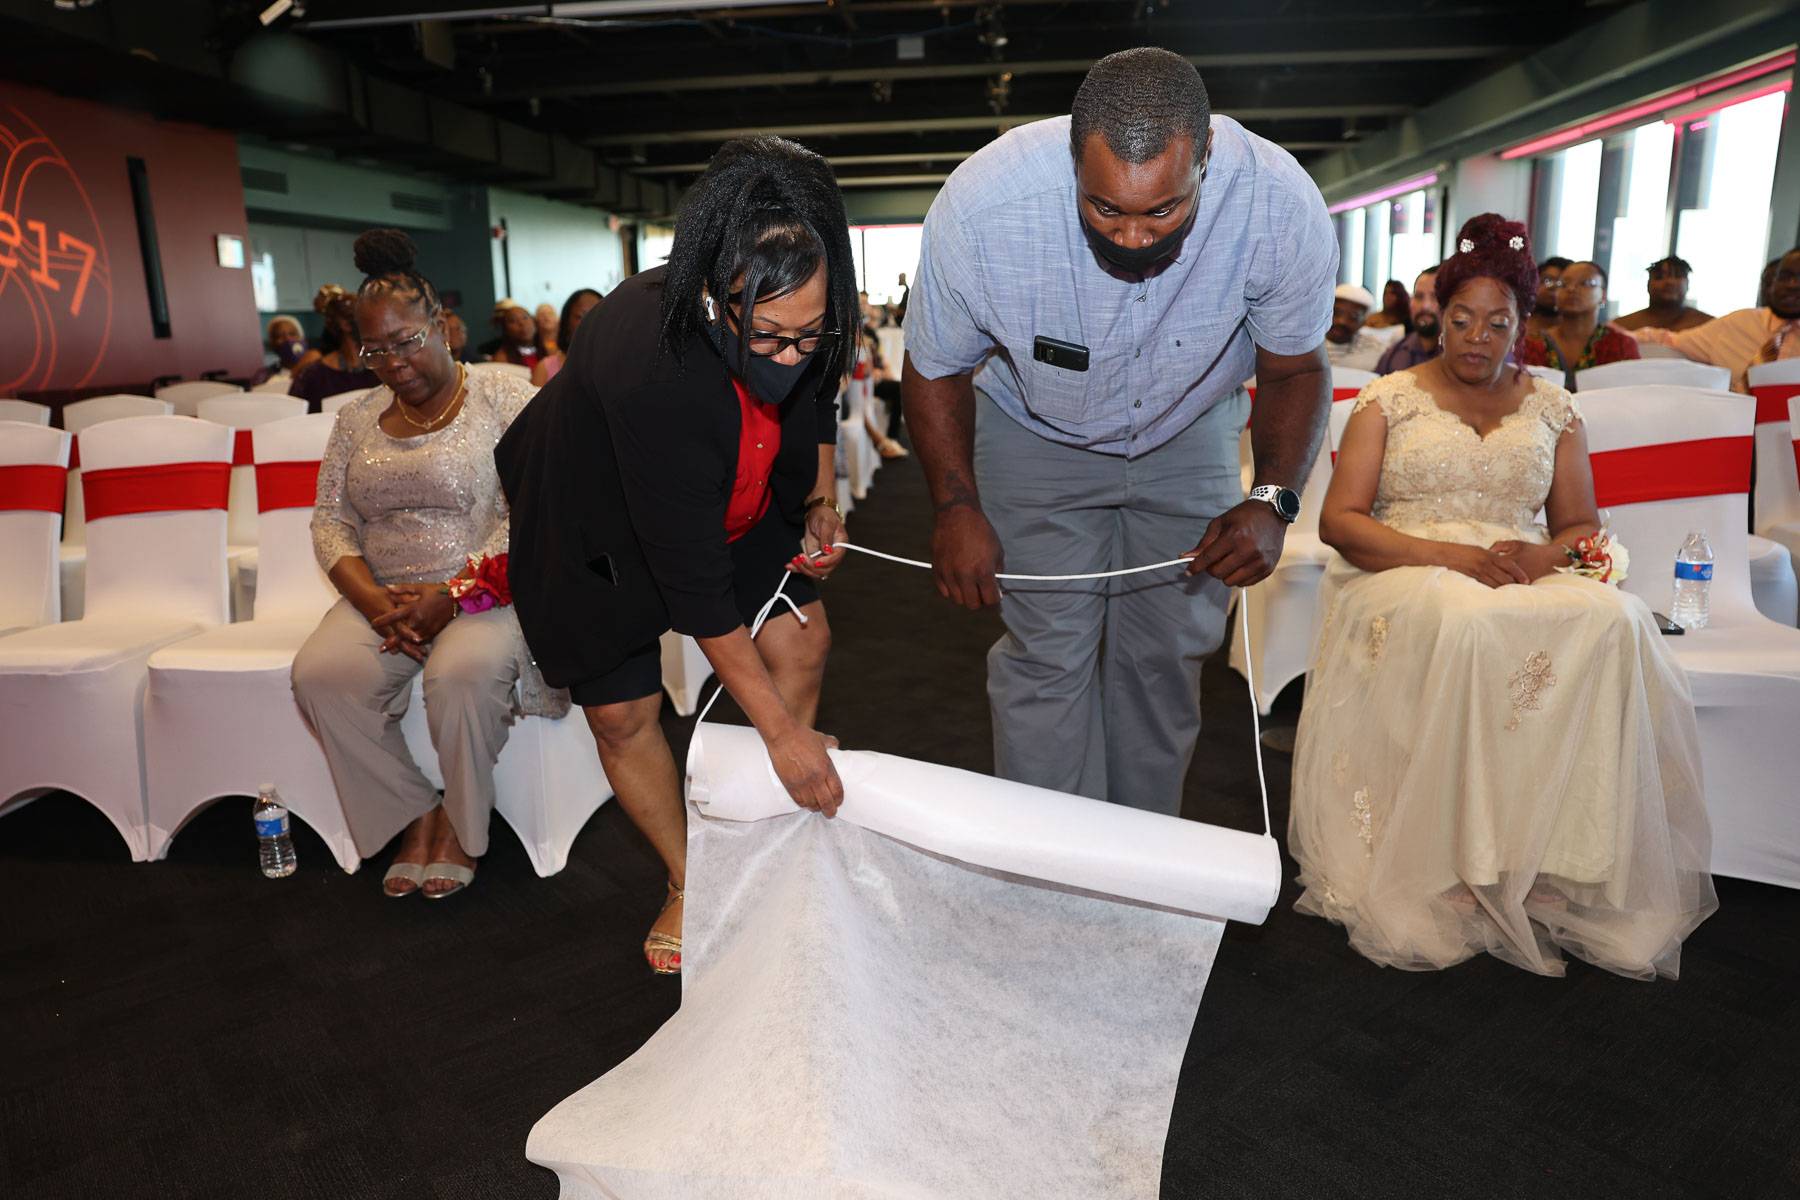 Two people rolling out the white carpet